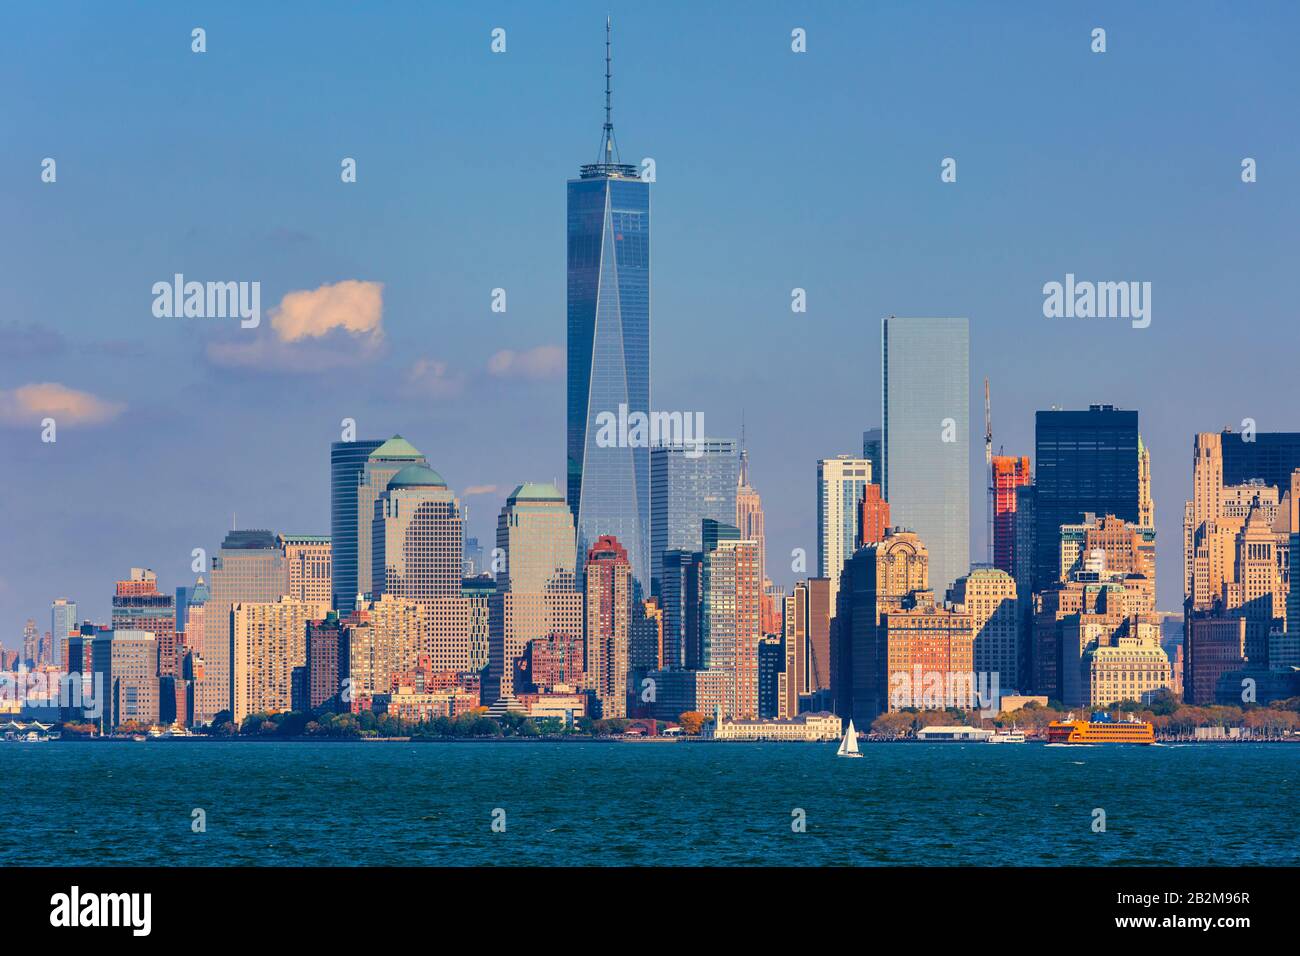 Lower Manhattan seen from New York Bay.  The tall building is One World Trade Center, also known as 1 World Trade Center, 1 WTC or Freedom Tower.  New Stock Photo